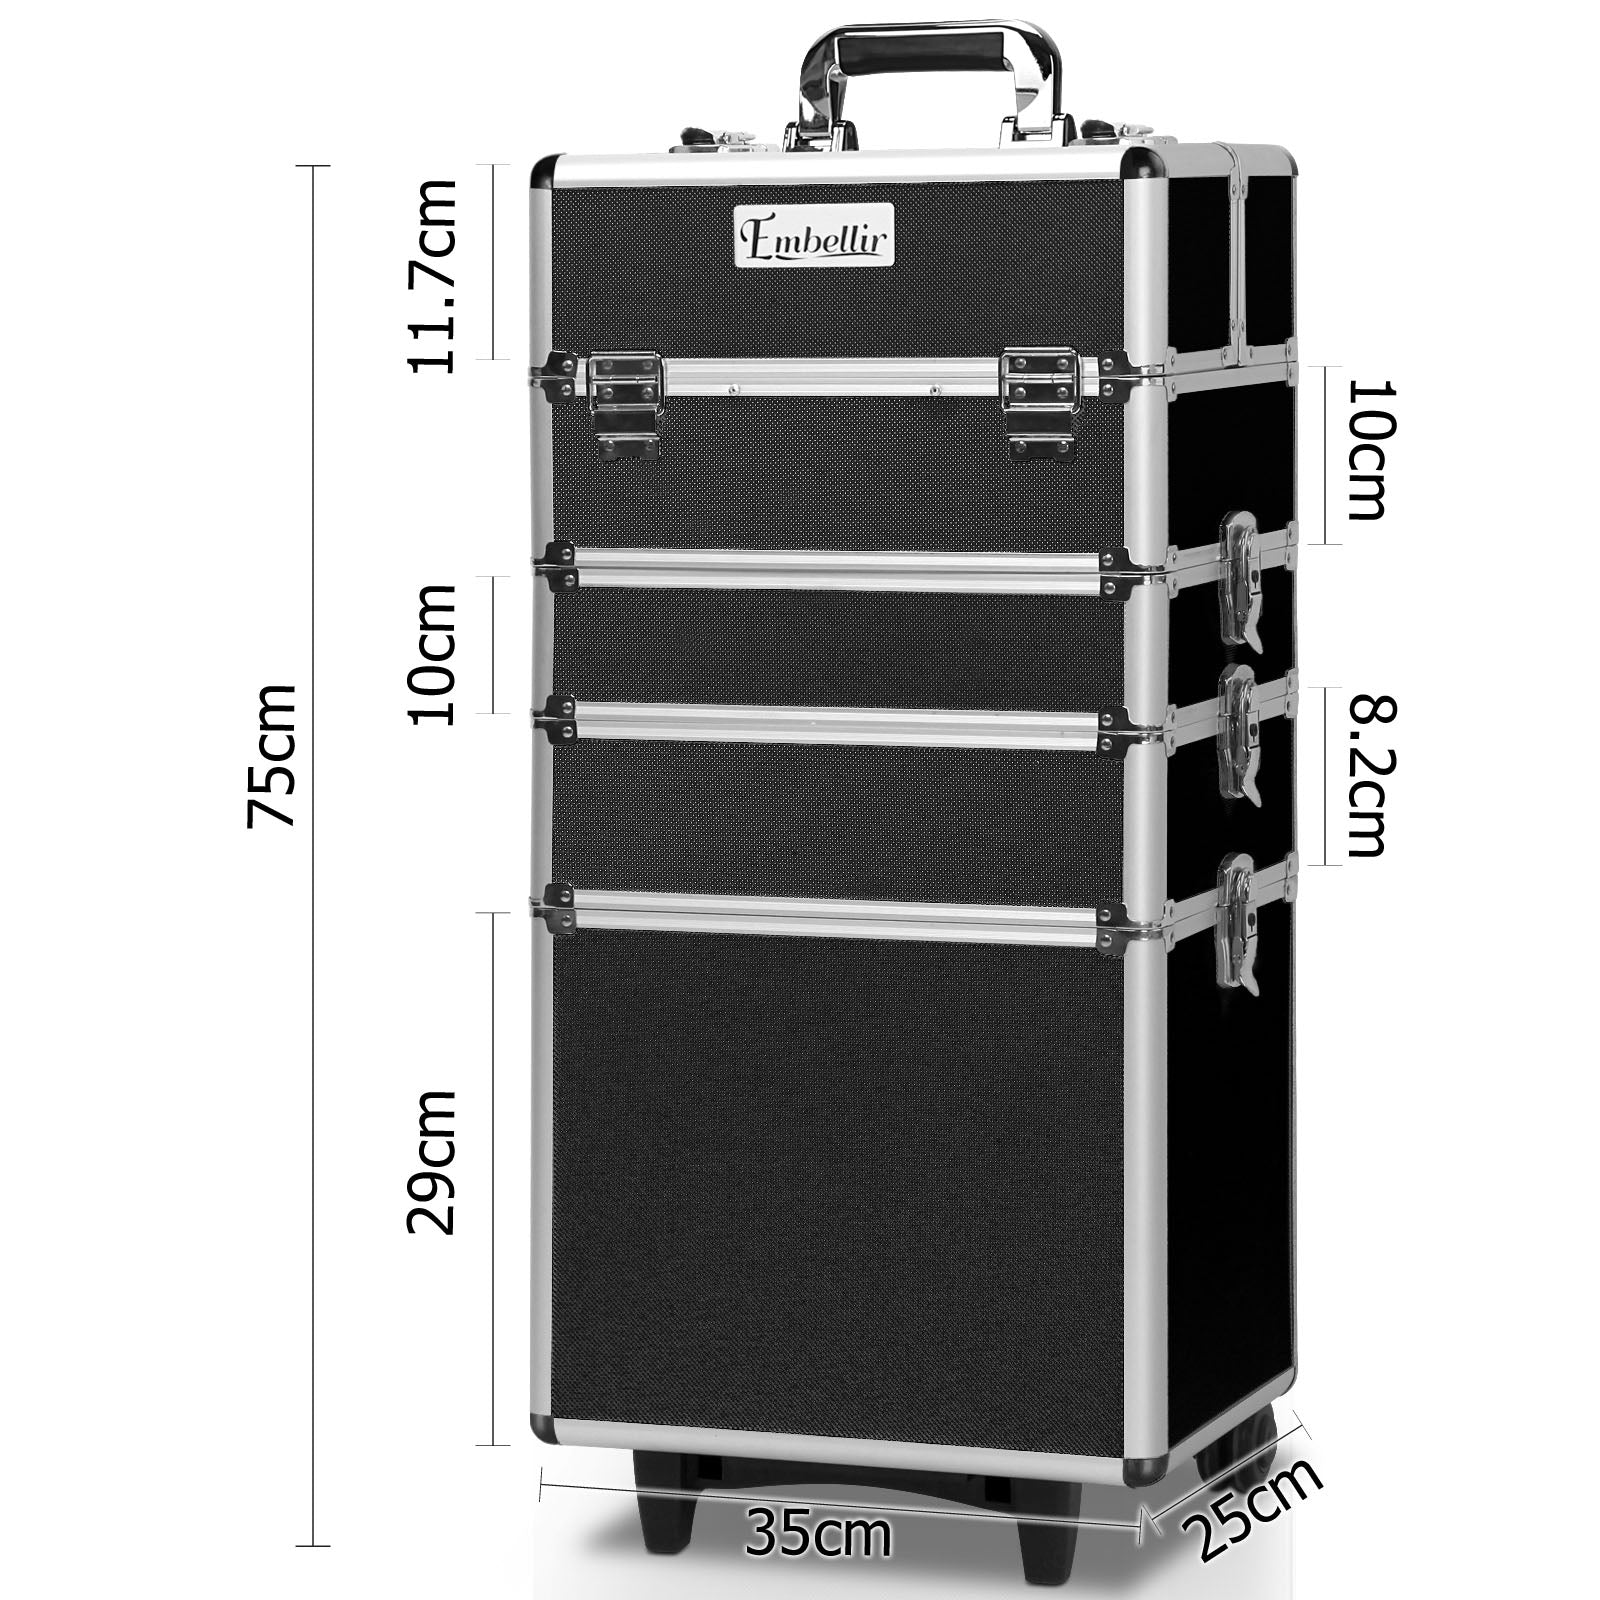 7 in 1 Portable Cosmetic Beauty Makeup Trolley - Black - image3